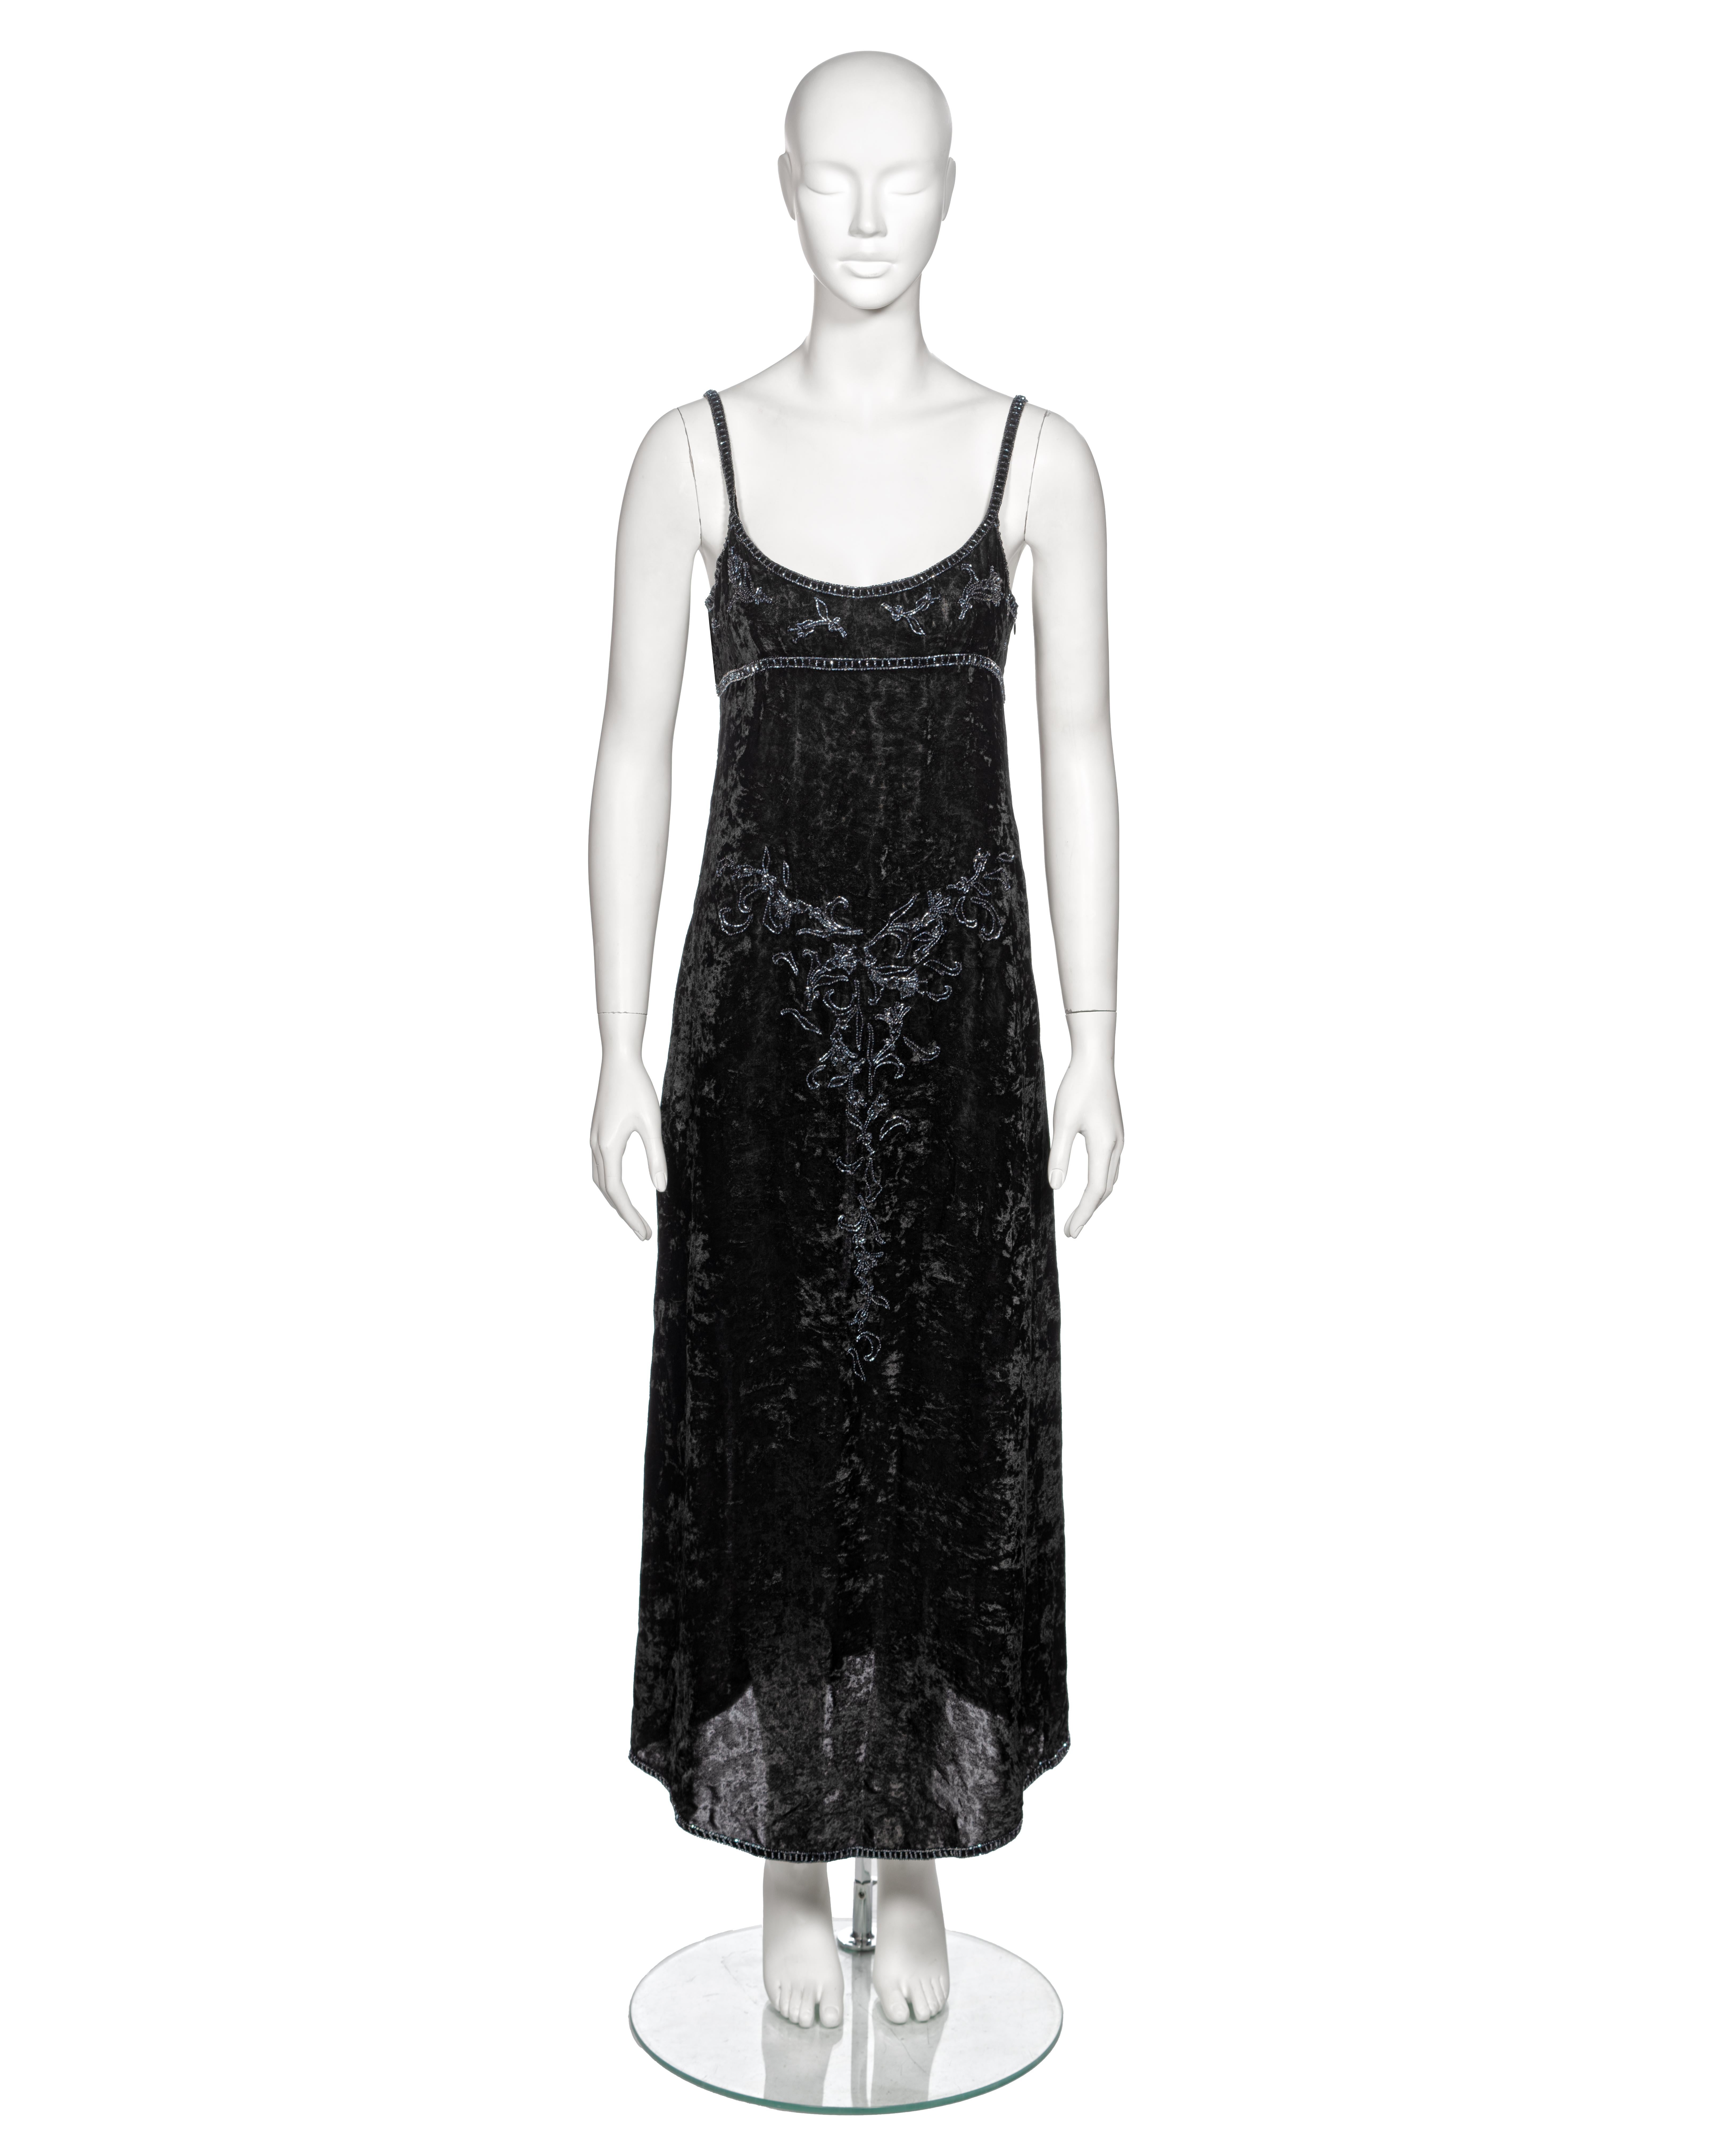 ▪ Archival Prada Velvet A-Line Slip Dress
▪ Creative Director: Miuccia Prada
▪ Fall-Winter 1997
▪ Sold by One of a Kind Archive
▪ Fashioned from a lightweight black crushed velvet
▪ Adorned with bugle bead embroidery depicting campanula flowers and